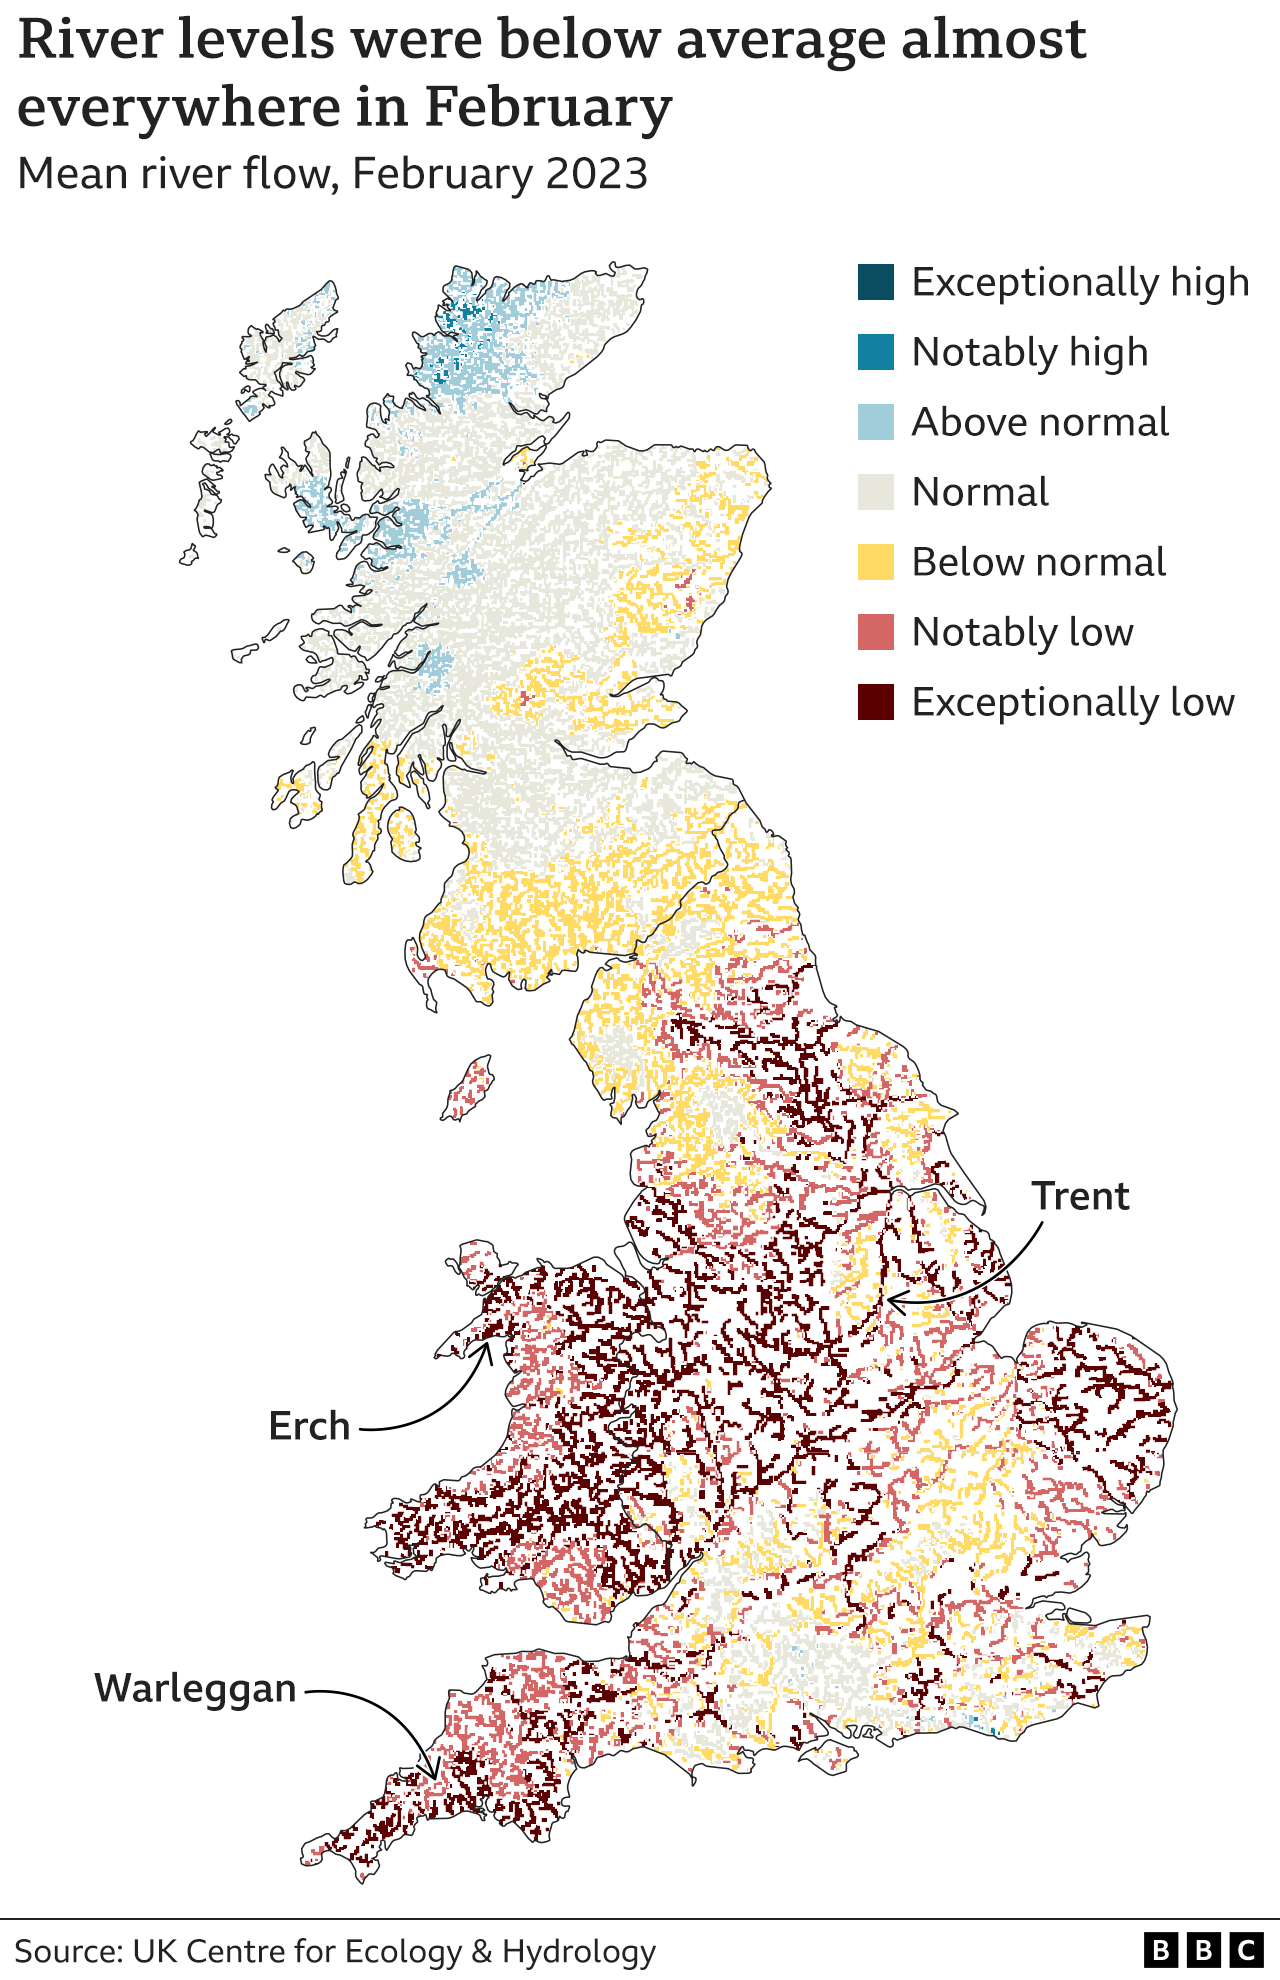 River water levels were below average in most of Great Britain in February